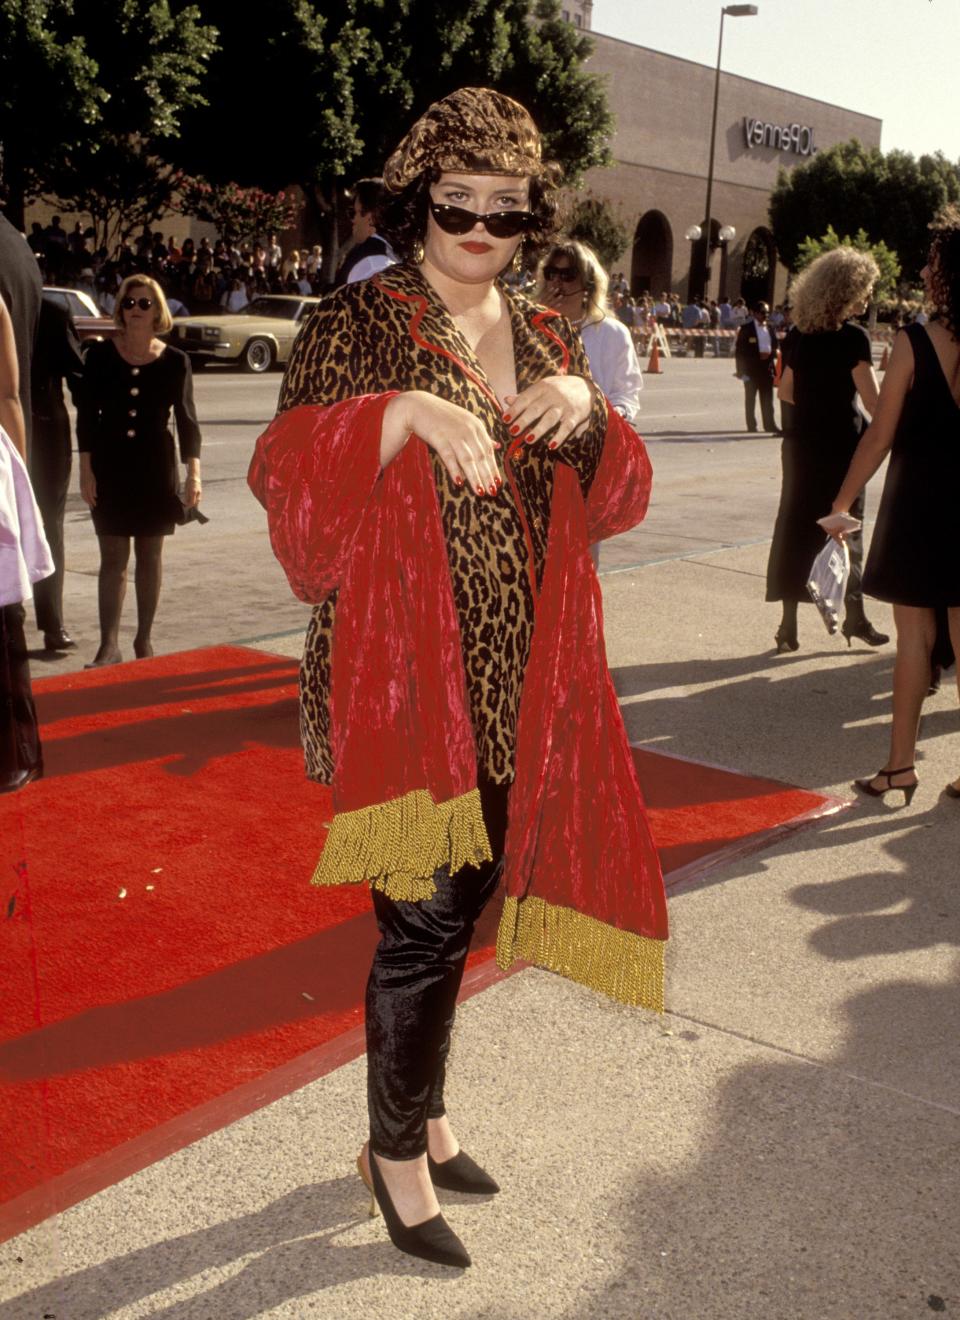 Rosie O'Donnell dressed in cheetah print and red blanket